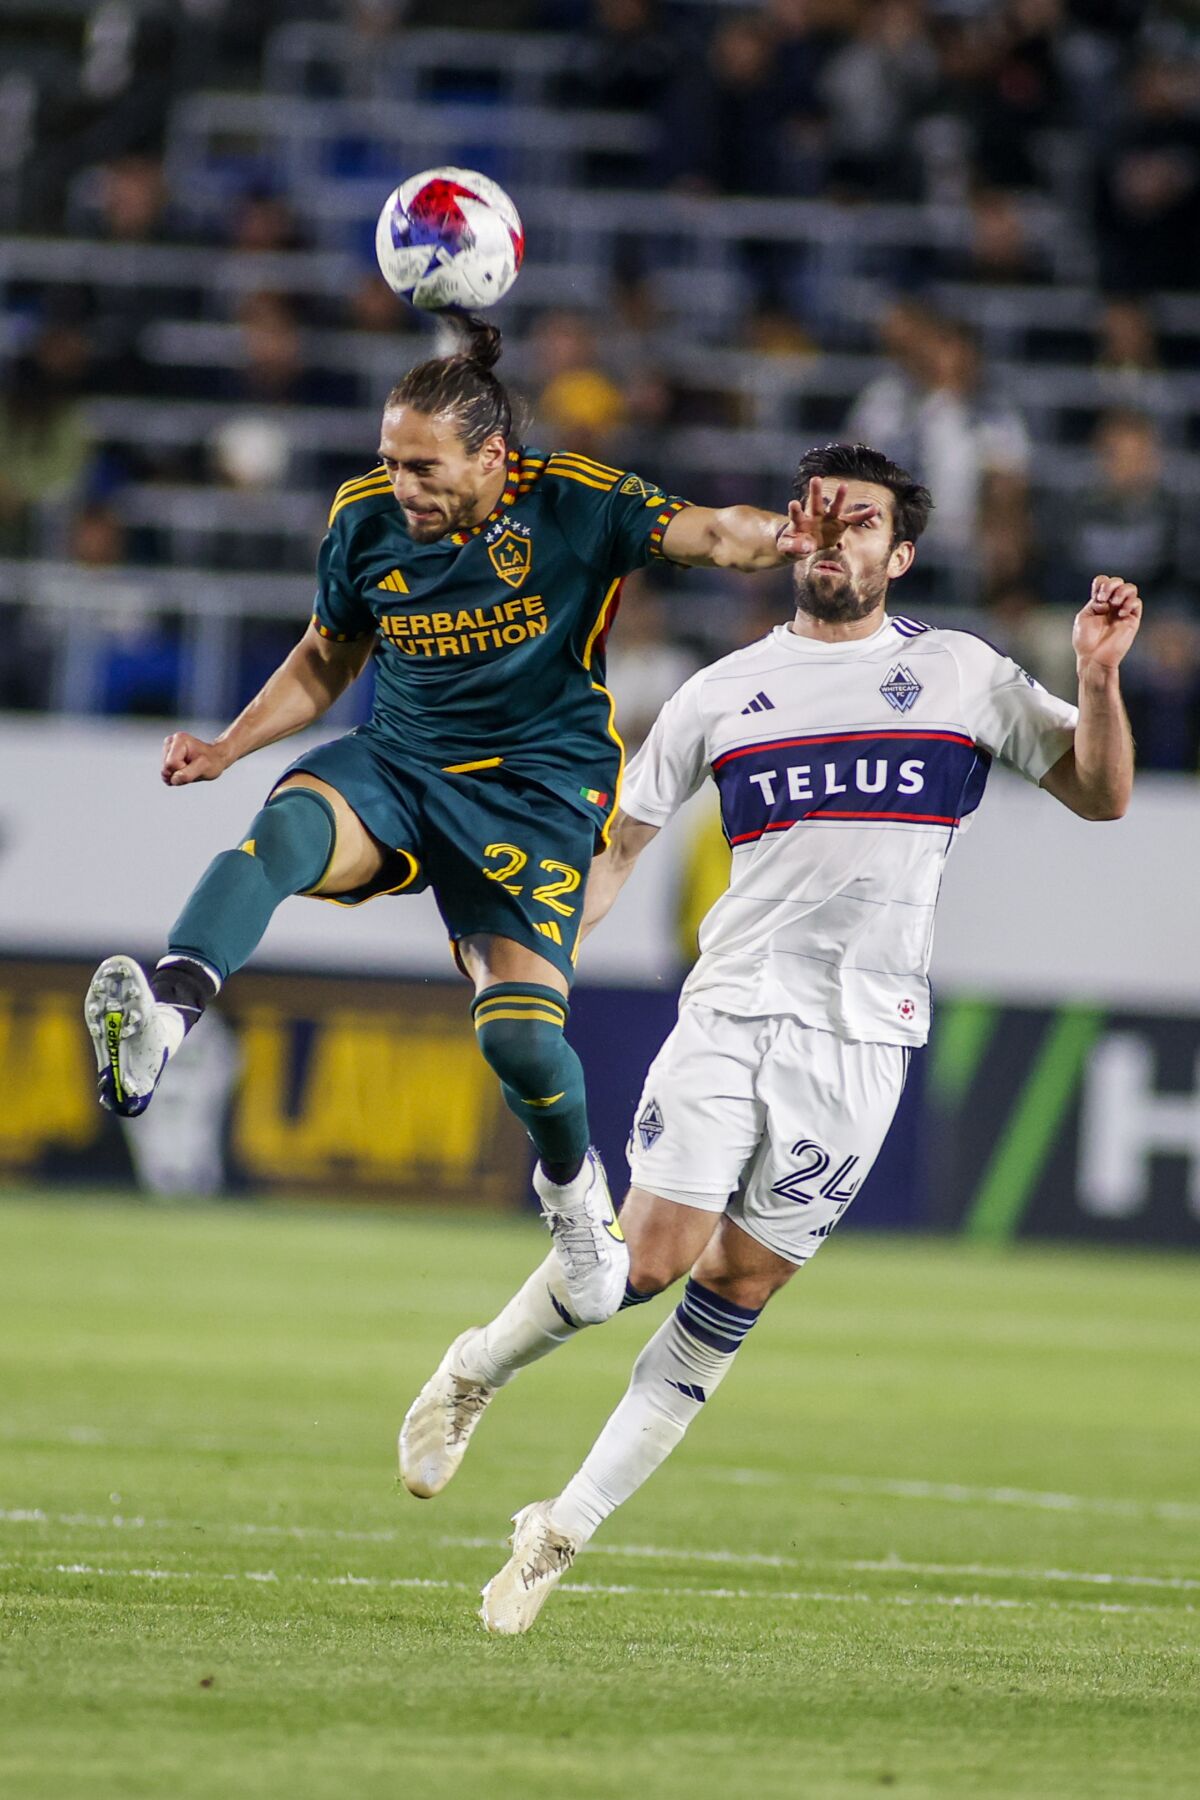 LA Galaxy defender Martín Cáceres, left, heads the ball away from Vancouver Whitecaps forward Brian White during the second half of an MLS soccer match in Carson, Calif., Saturday, March 18, 2023. (AP Photo/Ringo H.W. Chiu)